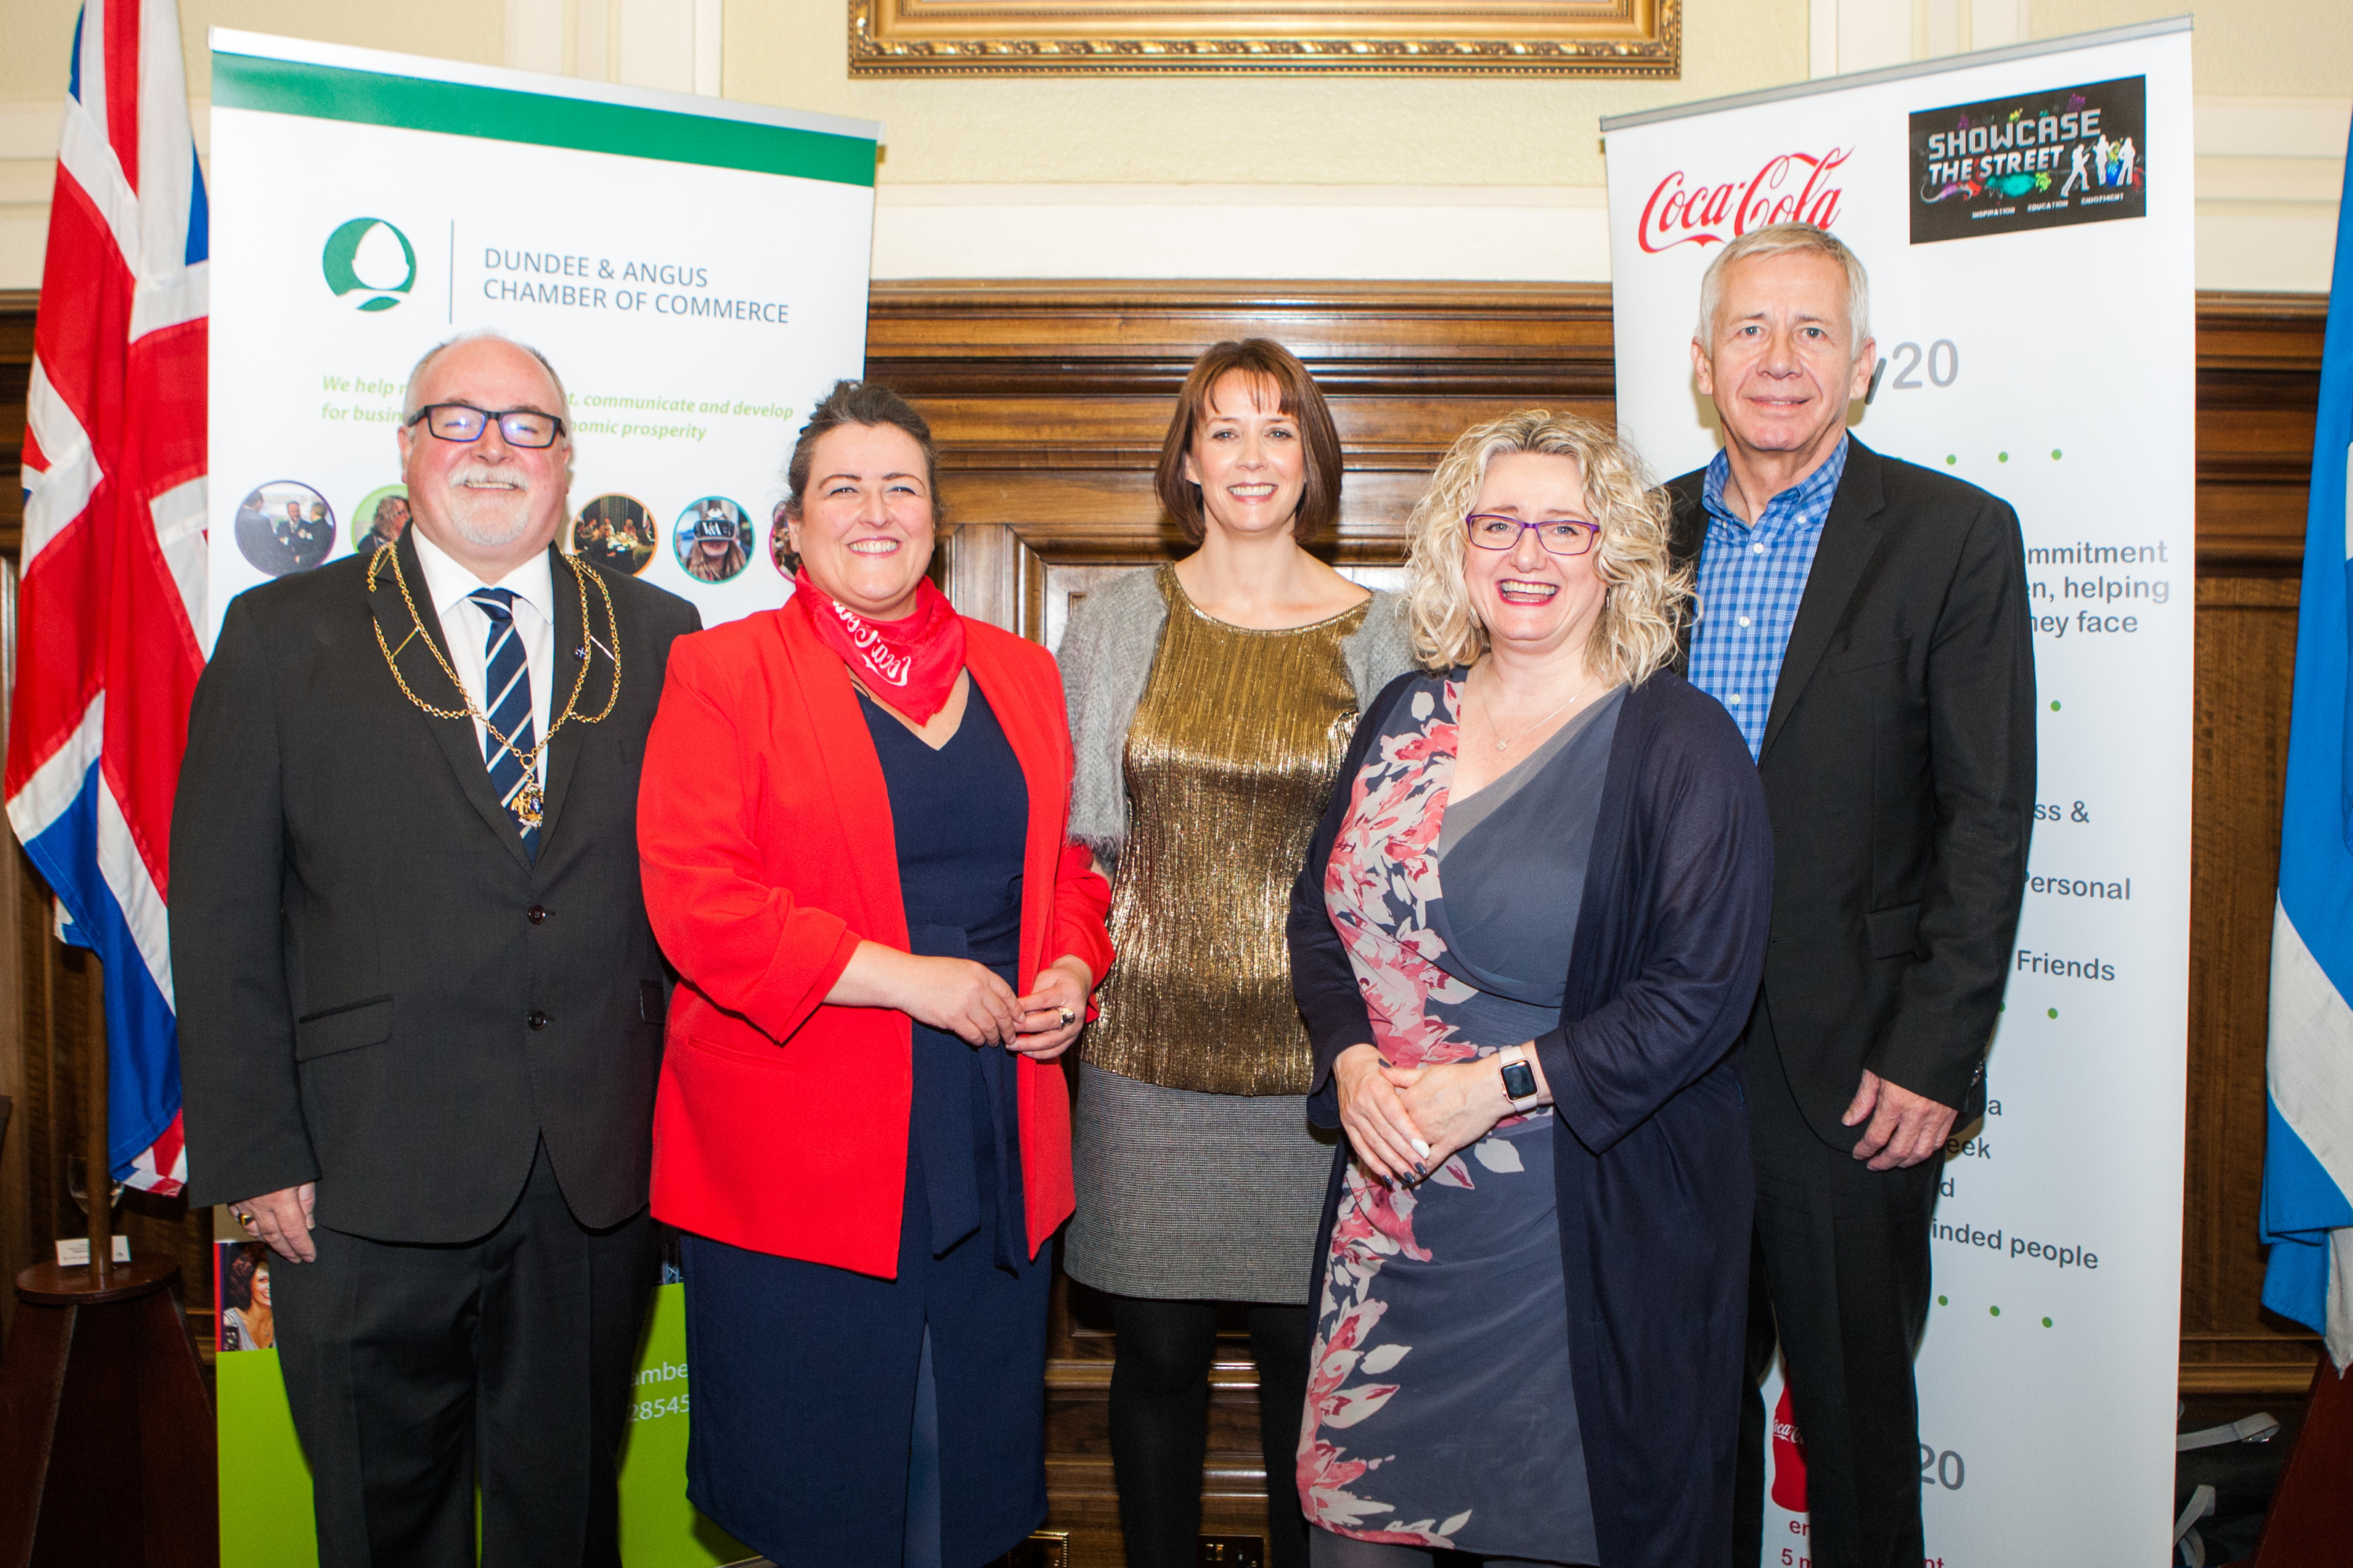 Left to right: Depute Lord Provost Bill Campbell, Councillor Lynne Short, Angie Foreman (5by20 Programme Director), Alison Henderson (Chief Executive of Dundee & Angus Chamber of Commerce) and Jim Fox (Coca-Cola).